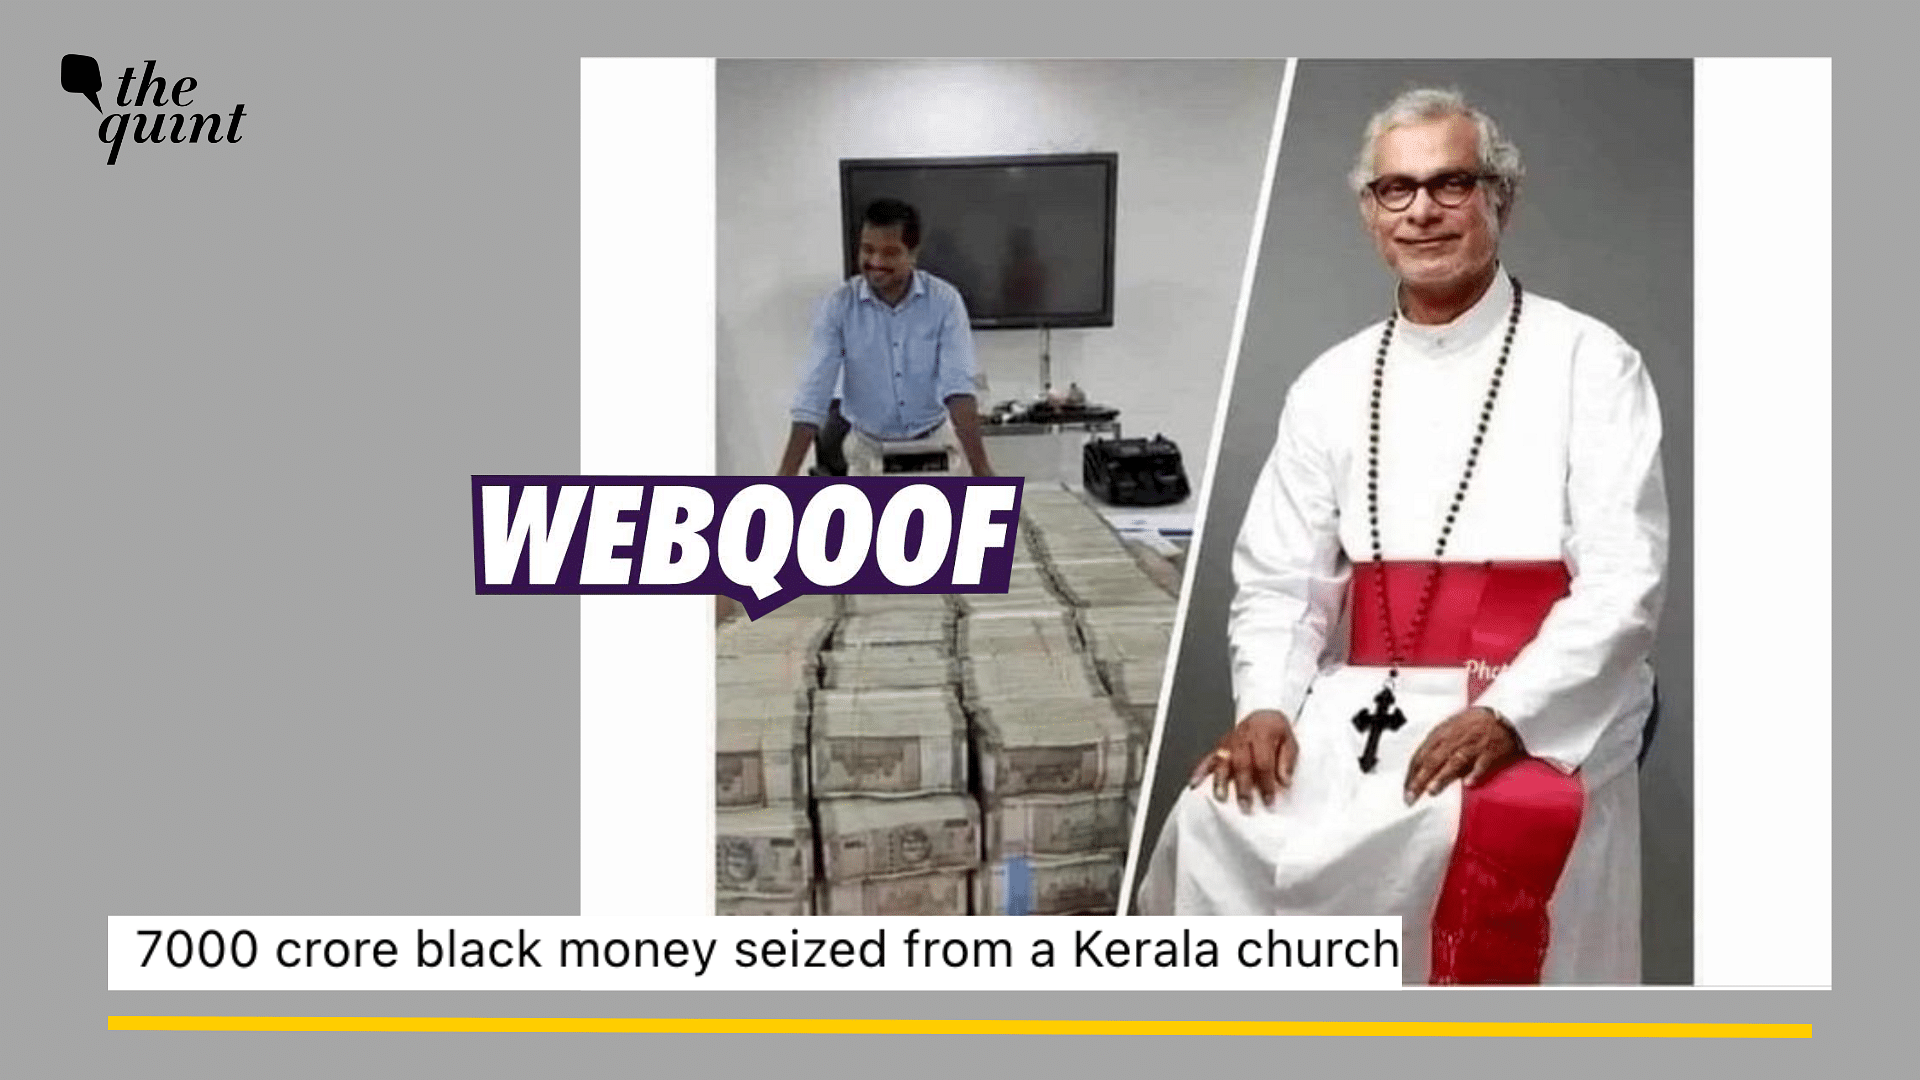 <div class="paragraphs"><p>Fact-Check: The claim that Rs 7000 crore was seized from Kerala's Believers Church is misleading.</p></div>